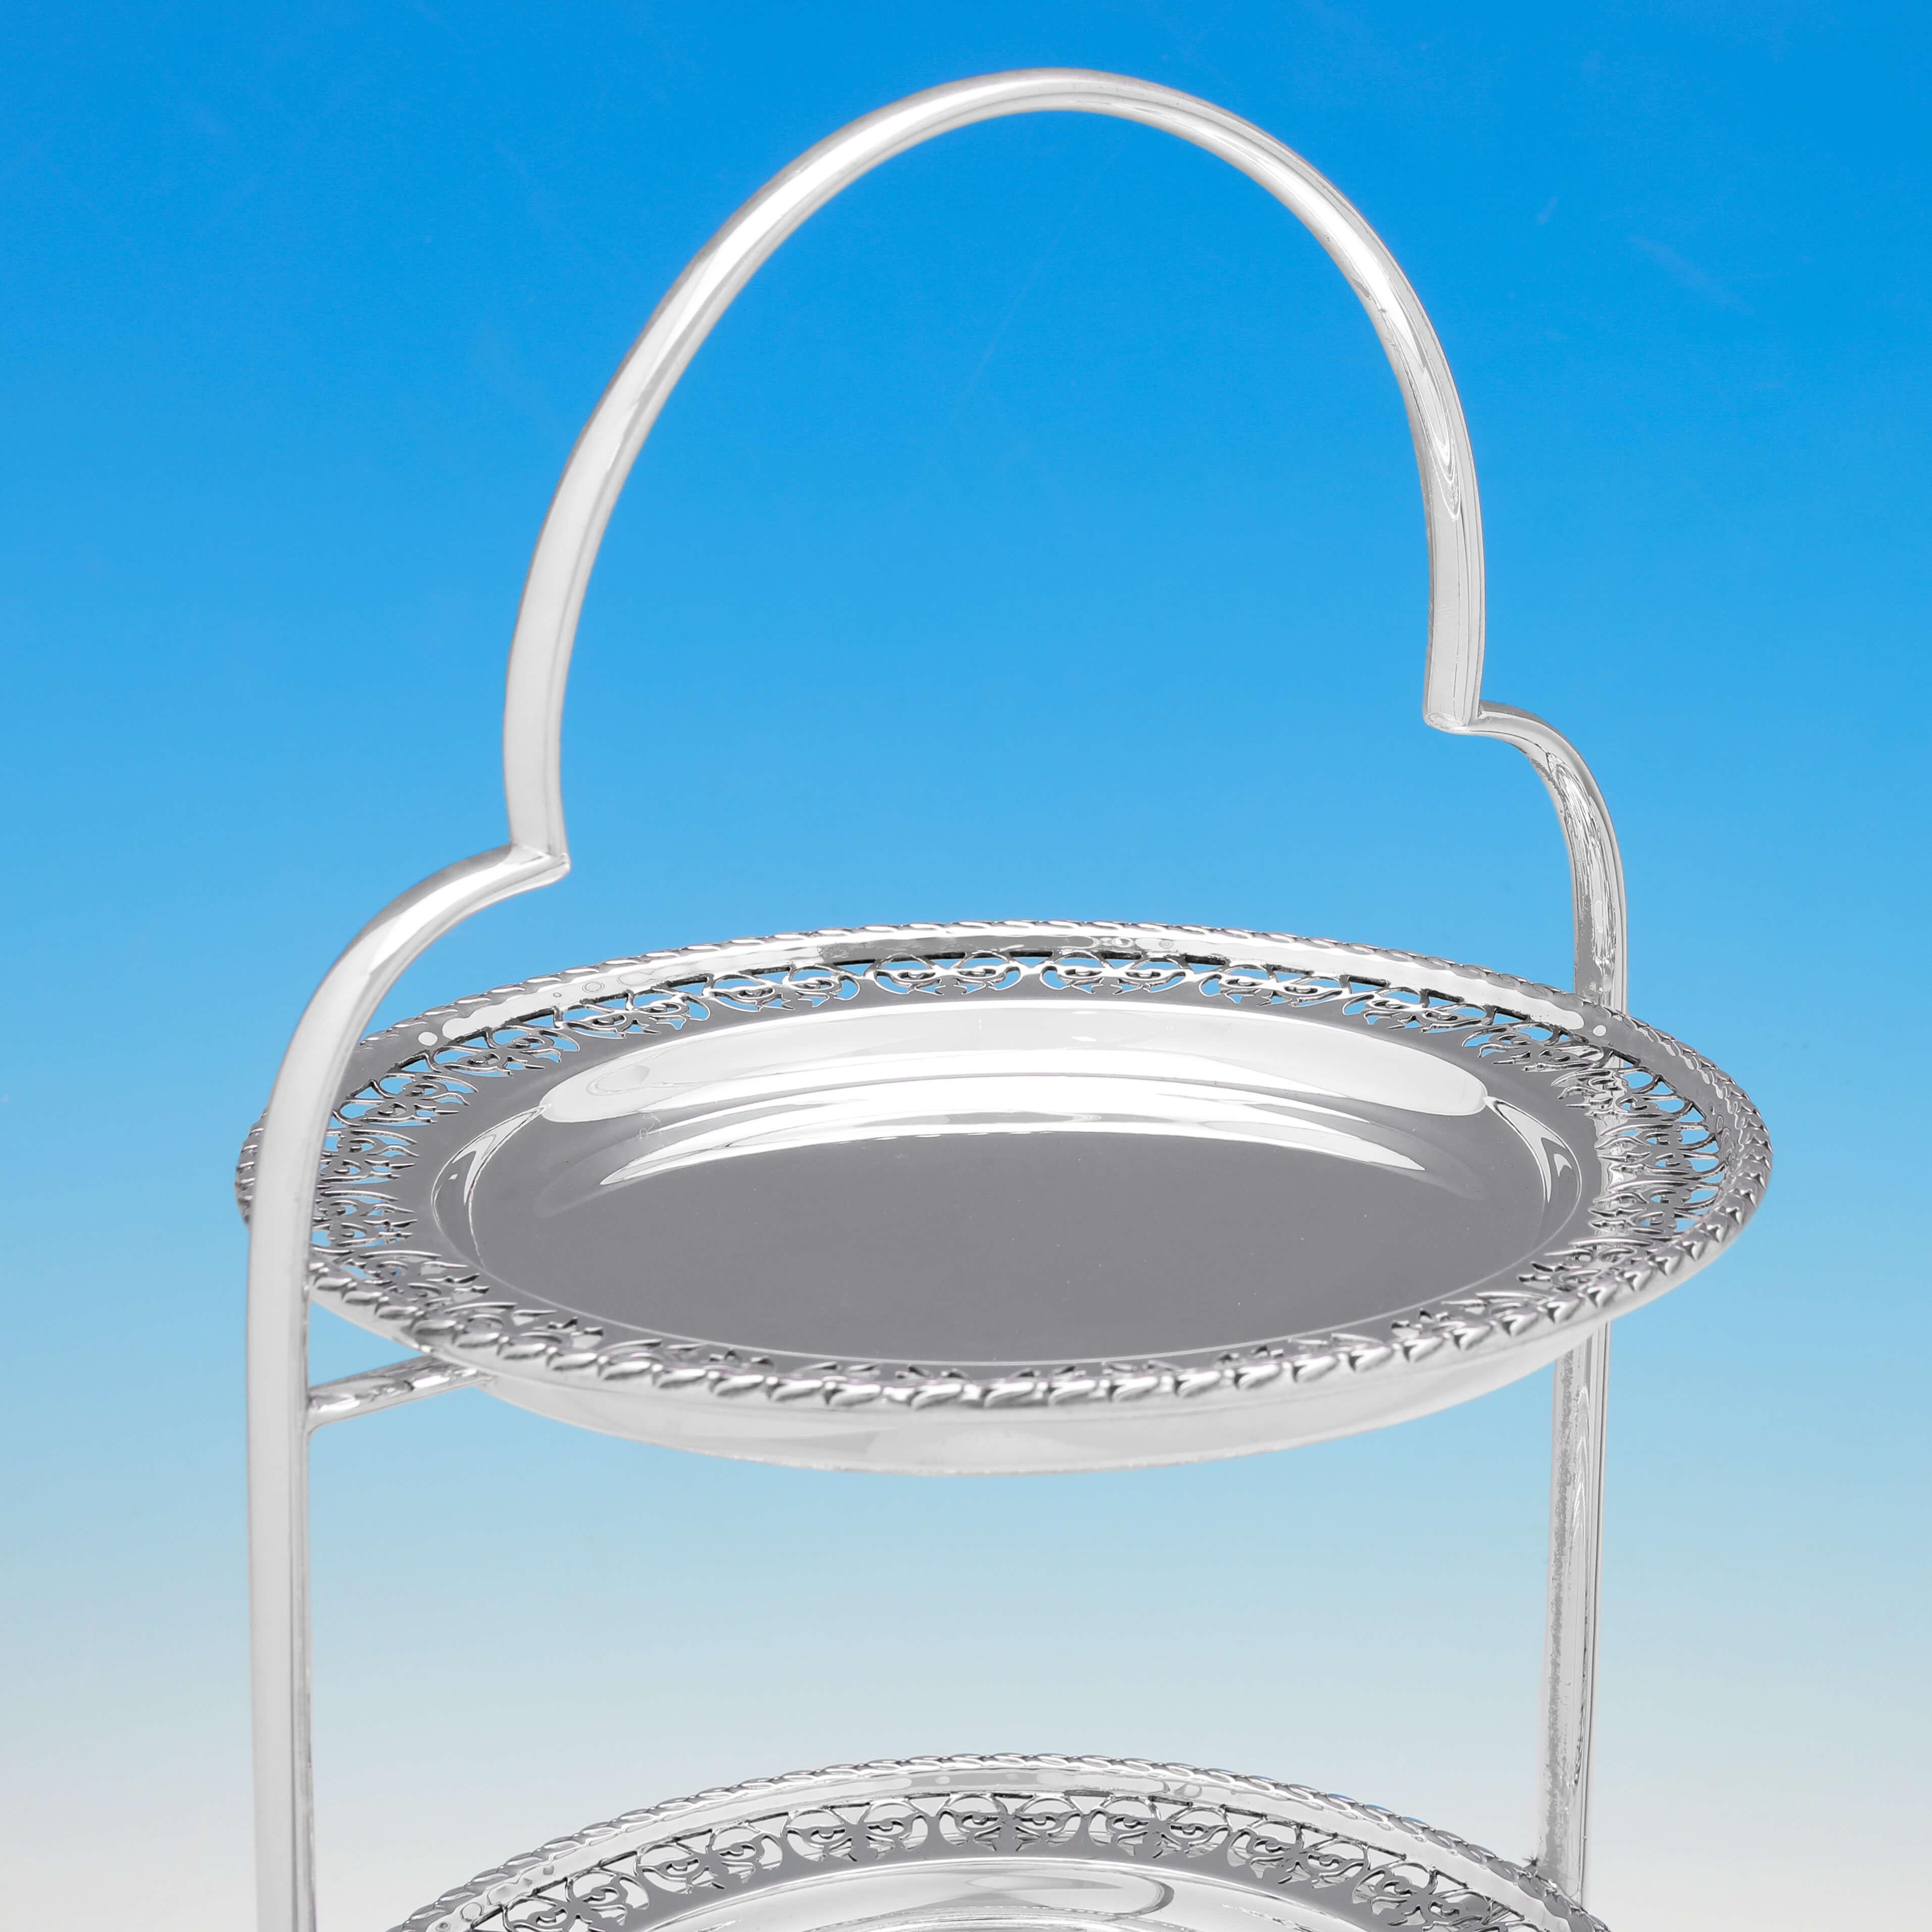 Made circa 1910 by Gladwin Ltd., this attractive, antique silver plate cake stand, has 3 tiers, and features a plain stand, and a pierced border to the plates. The cake stand measures 16.75